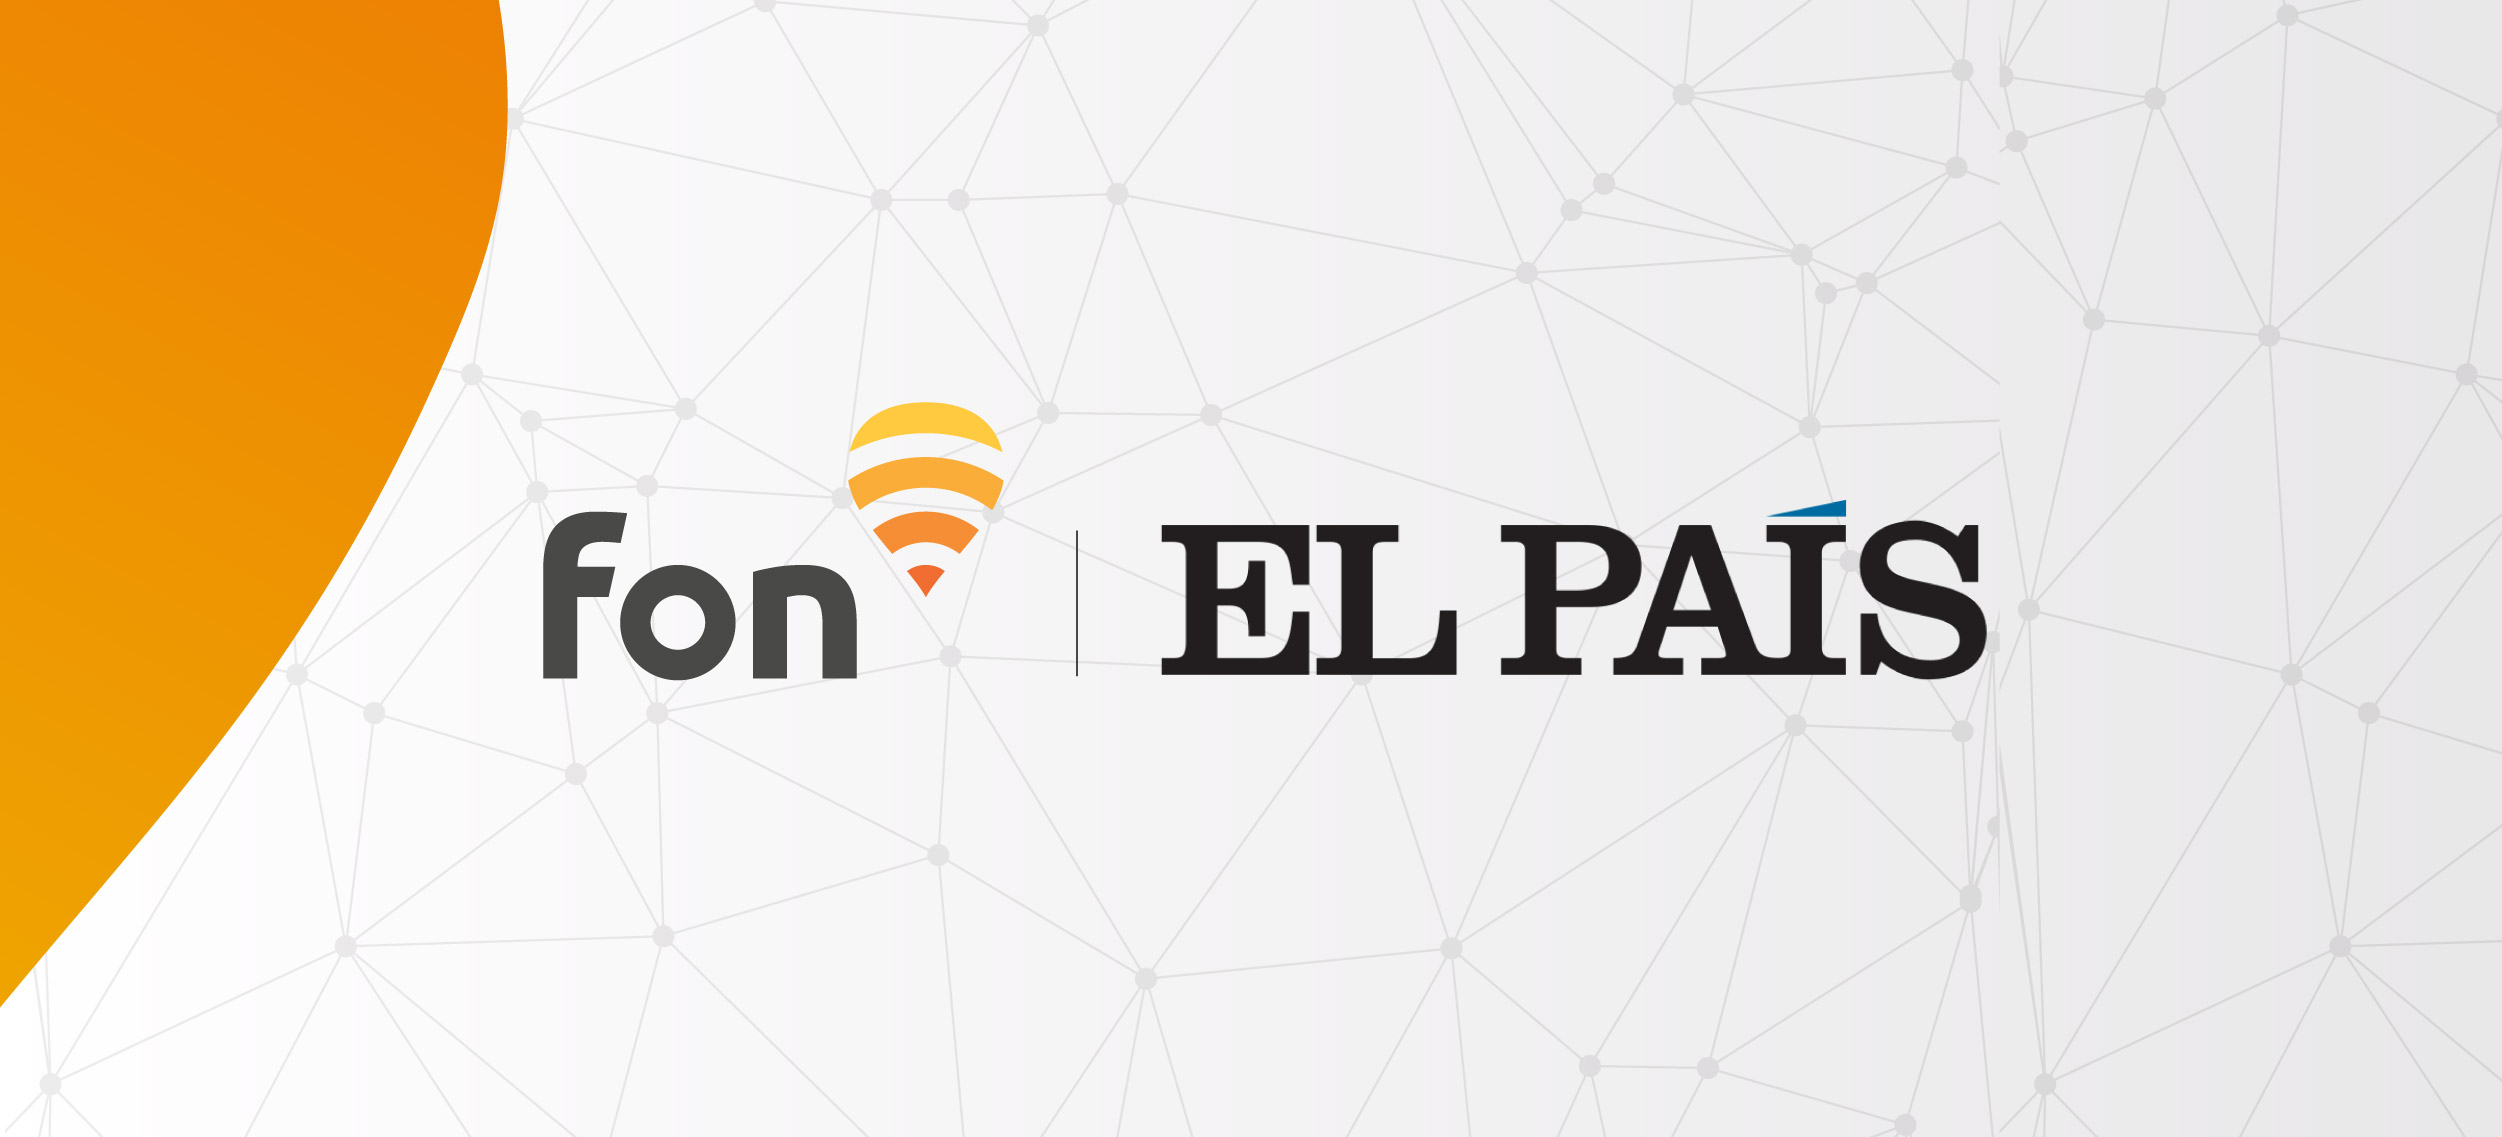 El País talks to Fon CEO about the future of WiFi